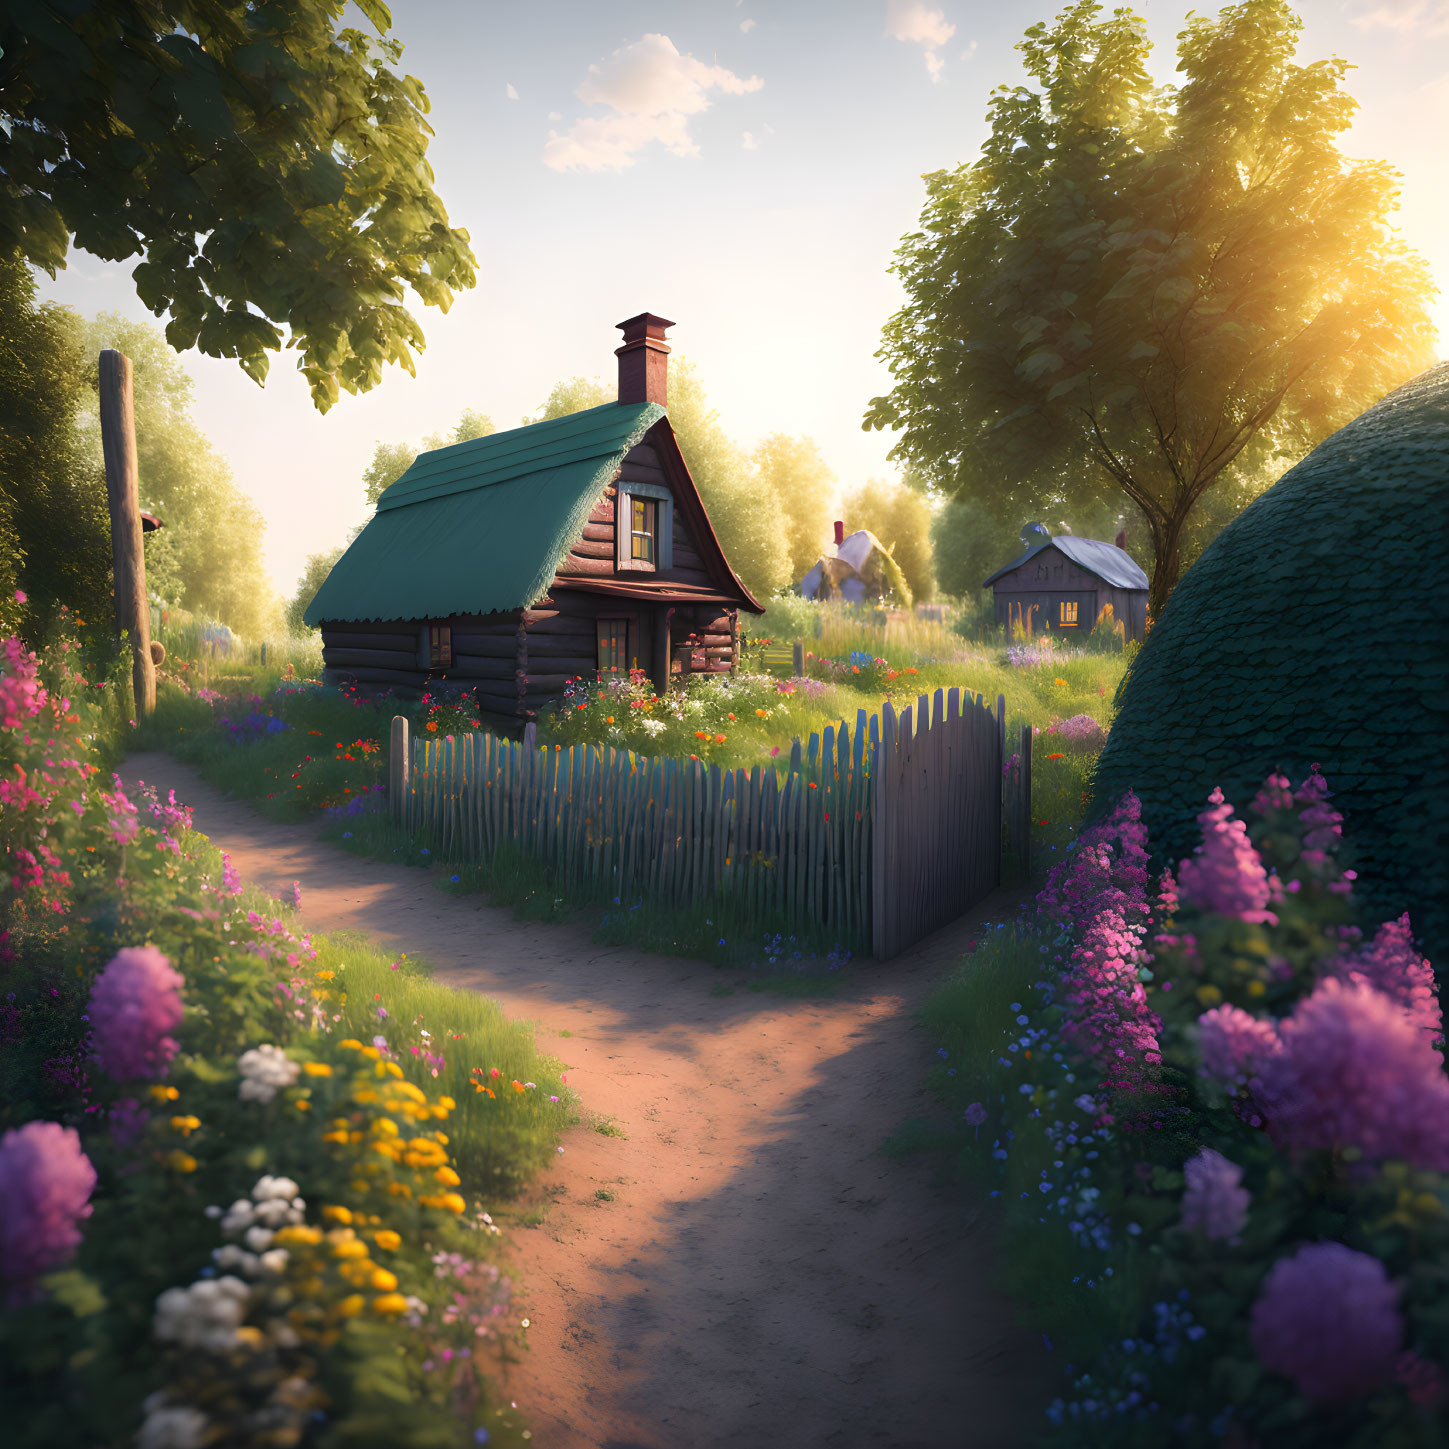 Thatched roof cabin with wooden fence and wildflowers at sunset